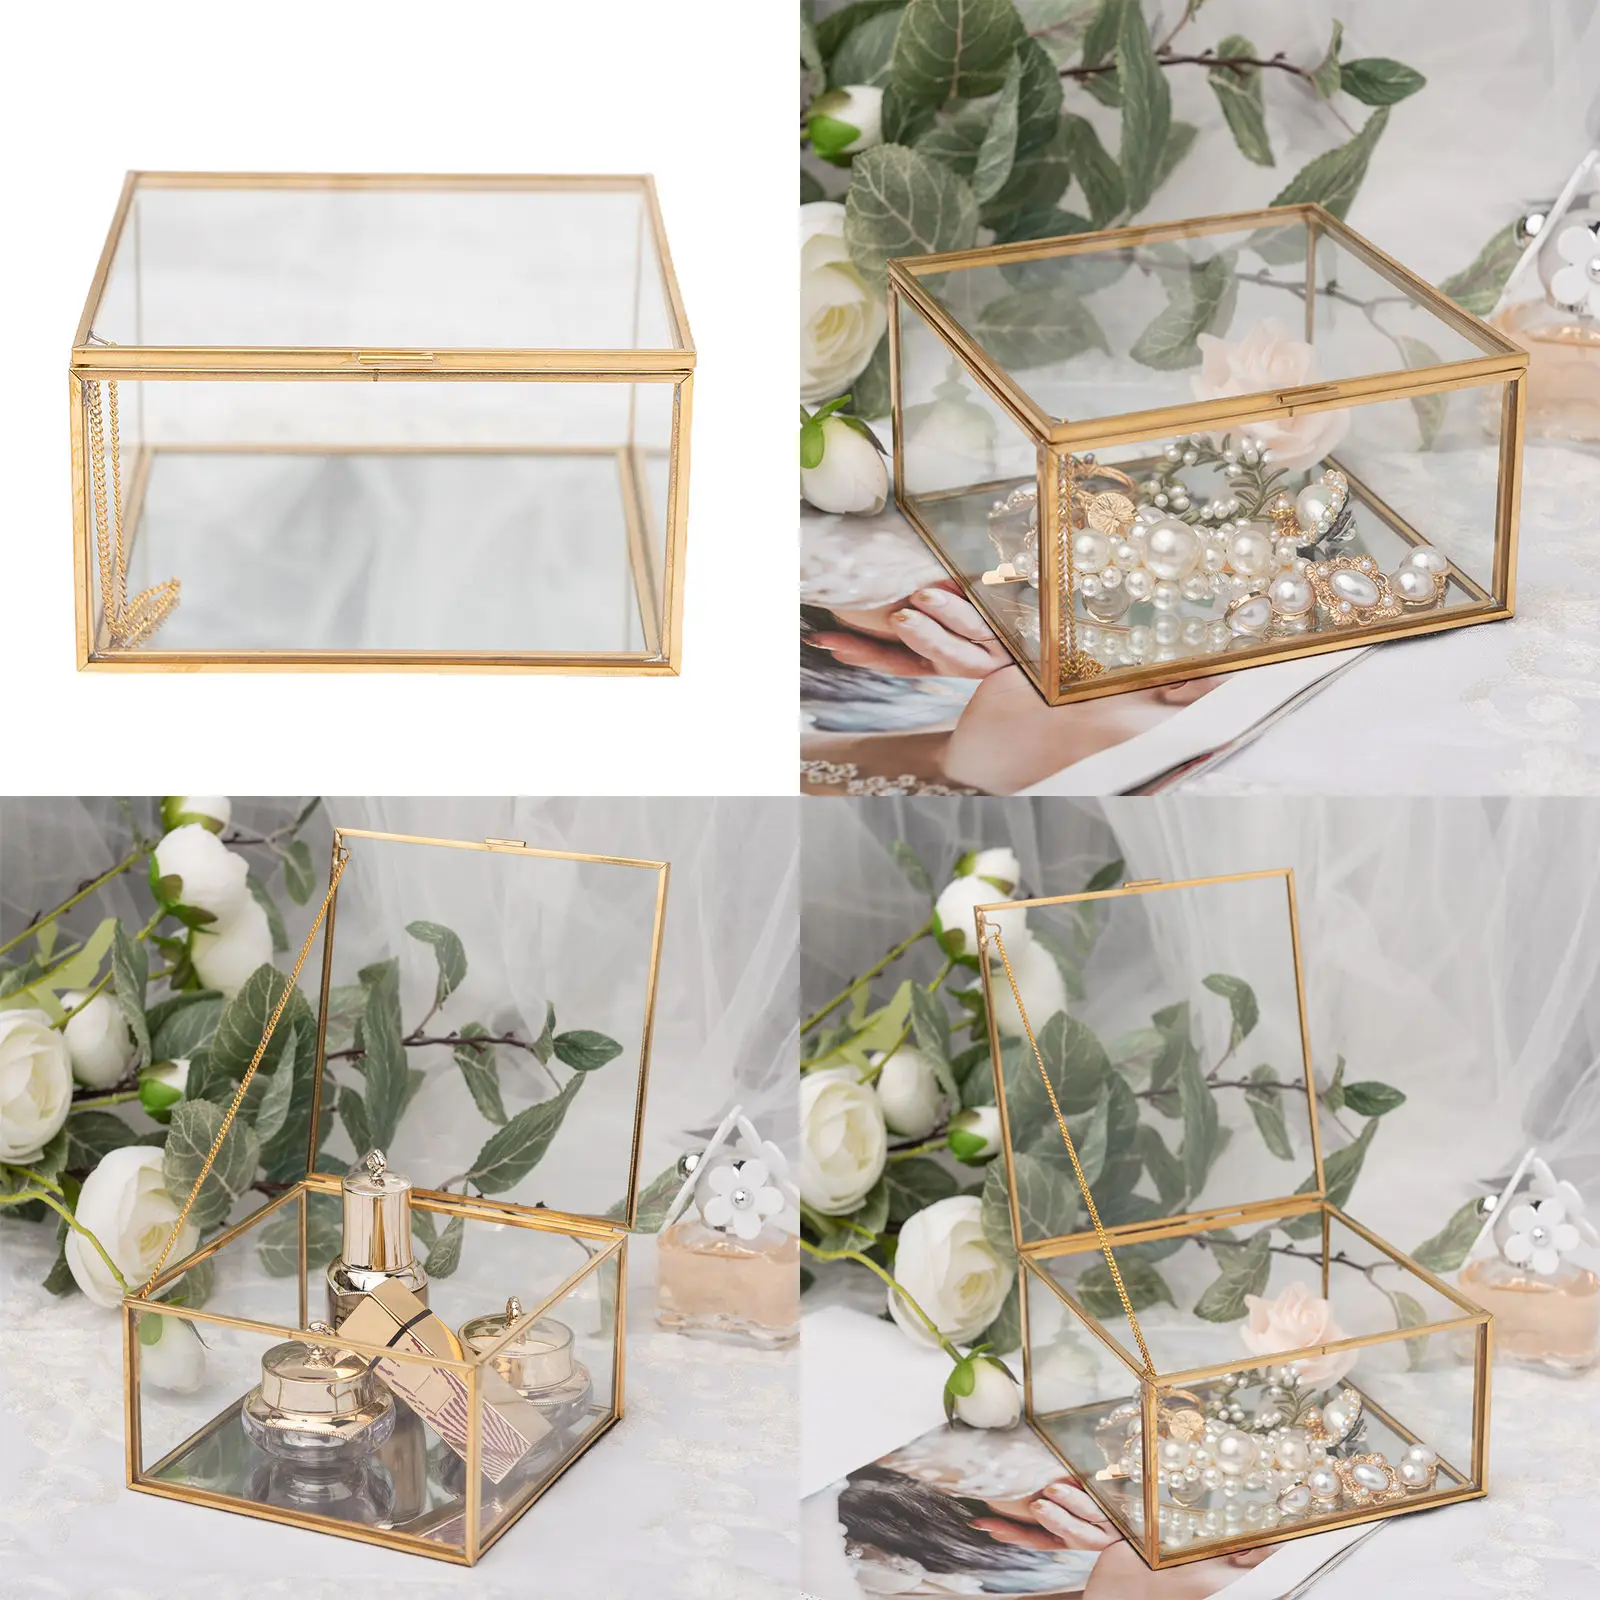 Golden Square Vintage Brass & Clear Glass Decorative Box Home Decor, Small Jewelry Case Box Organizer with Latching Lid 5x5x3